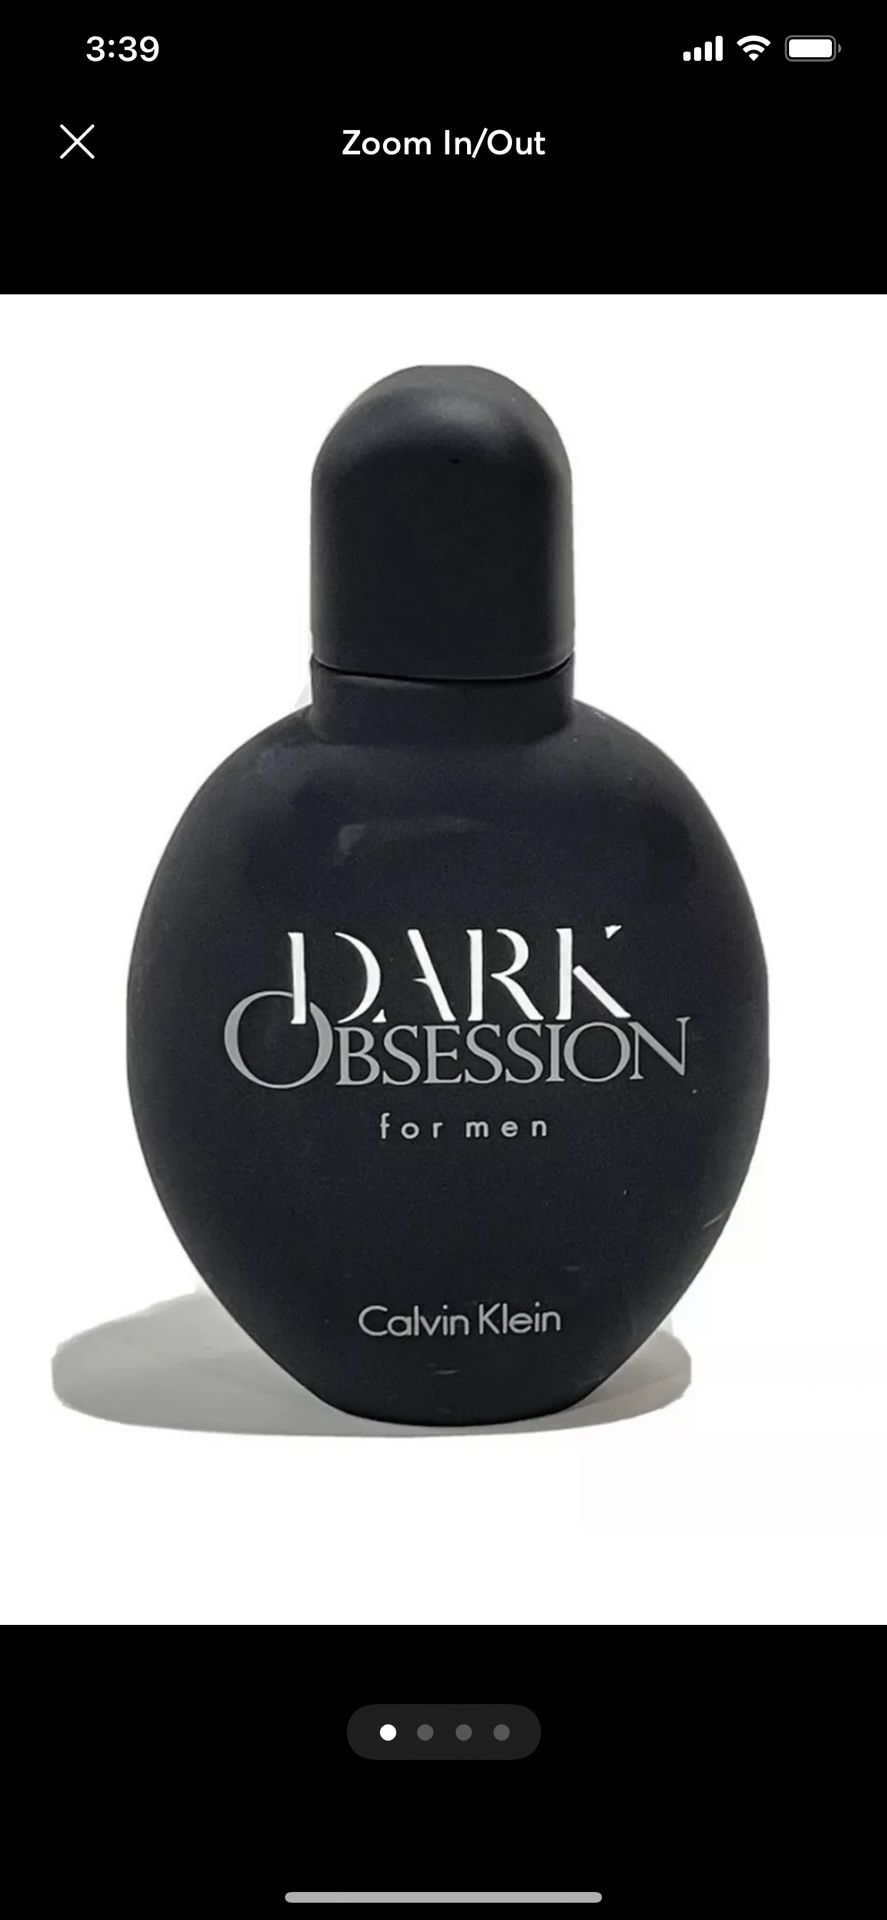 DISCONTINUED!!!  Dark Obsession Calvin Klein EAU DE TOILETTE   4oz Spray  NO BOX  SAME AS PICTURES  NEVER BEEN USED OR TESTED